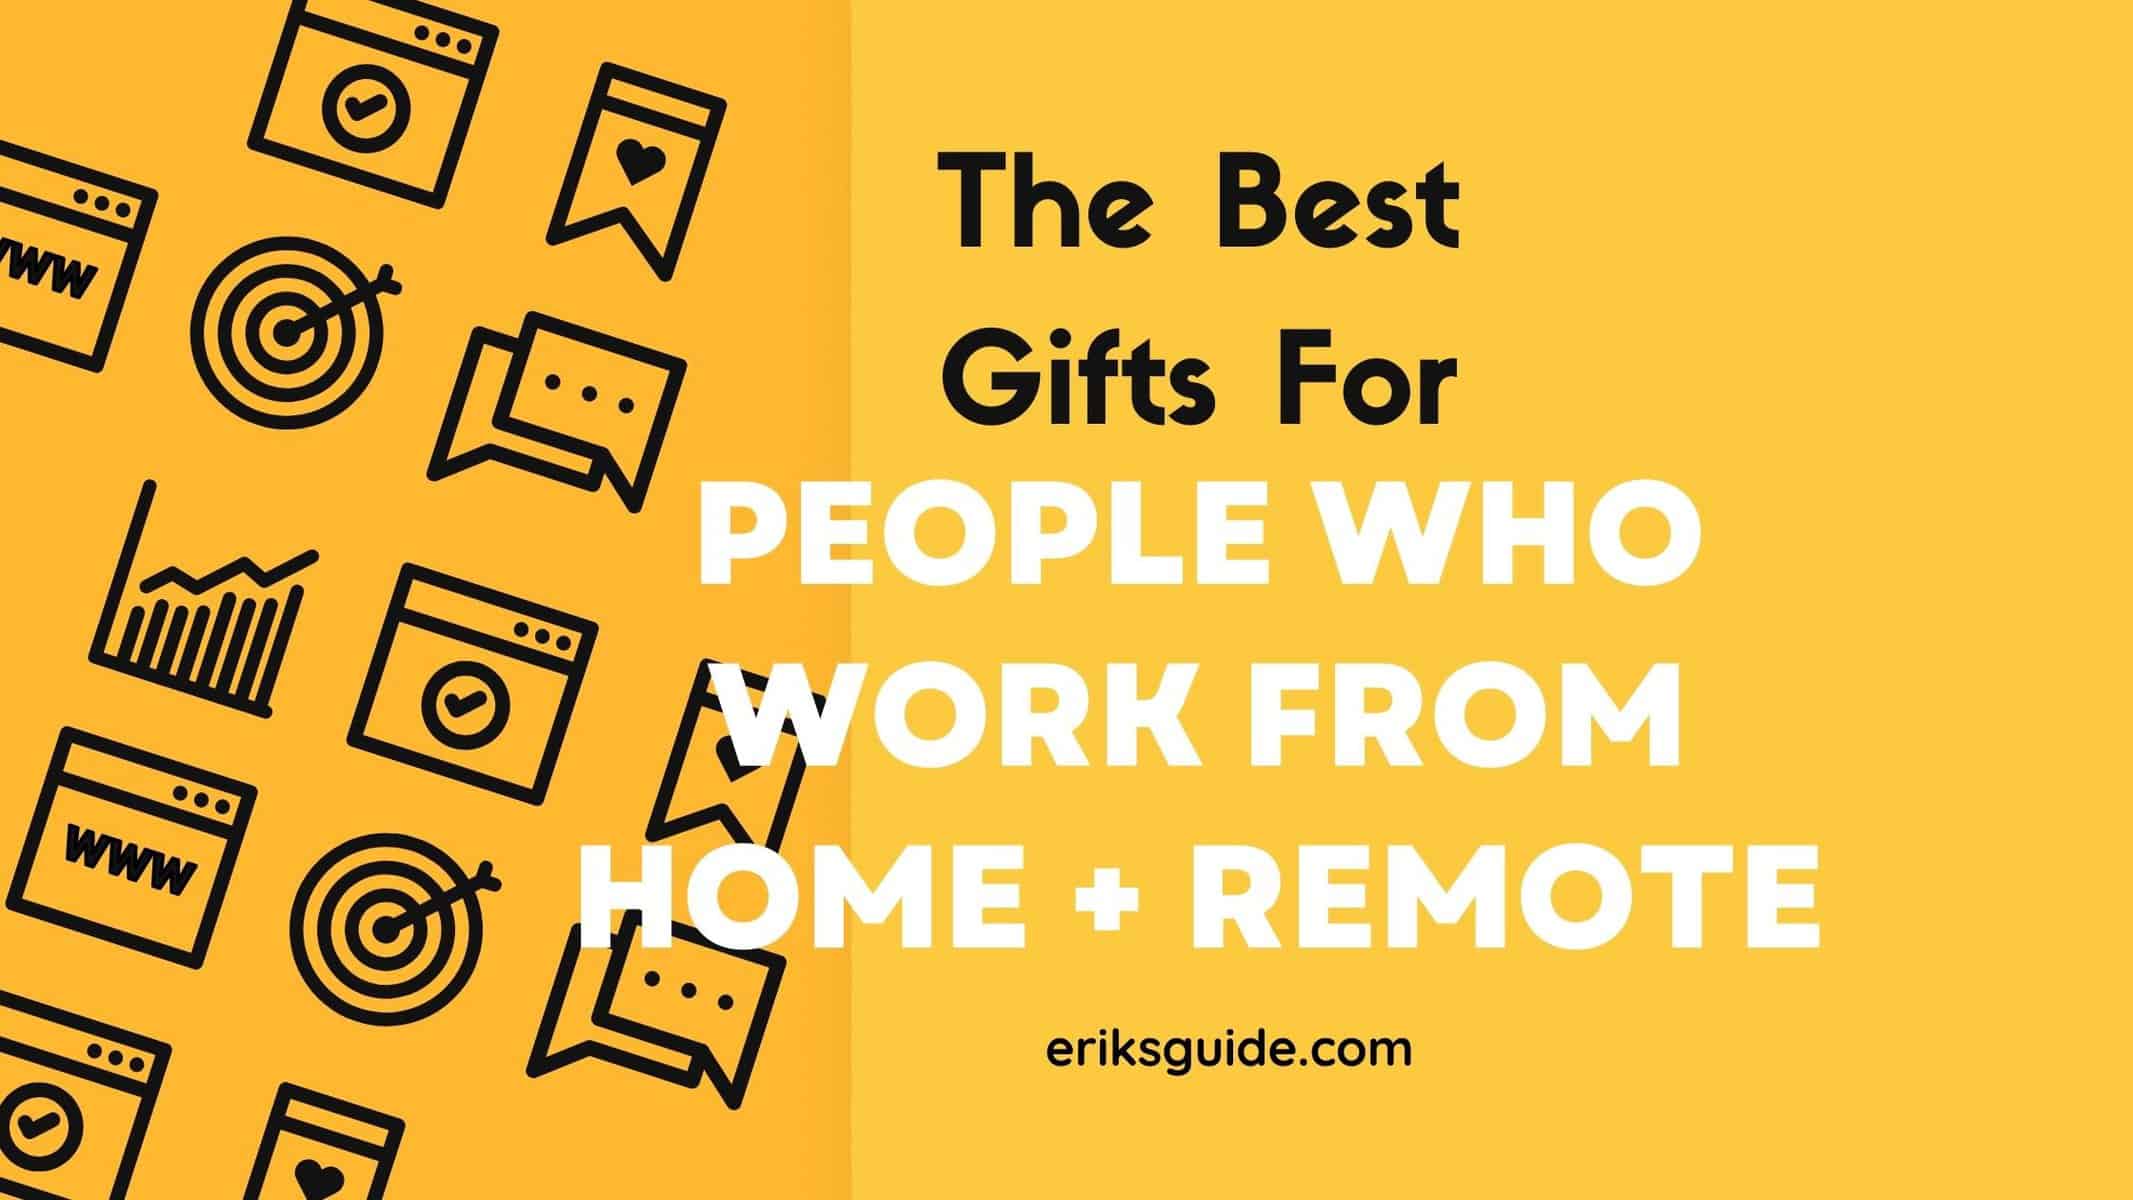 https://eriksguide.com/wp-content/uploads/2022/10/best-work-from-home-gifts.jpg